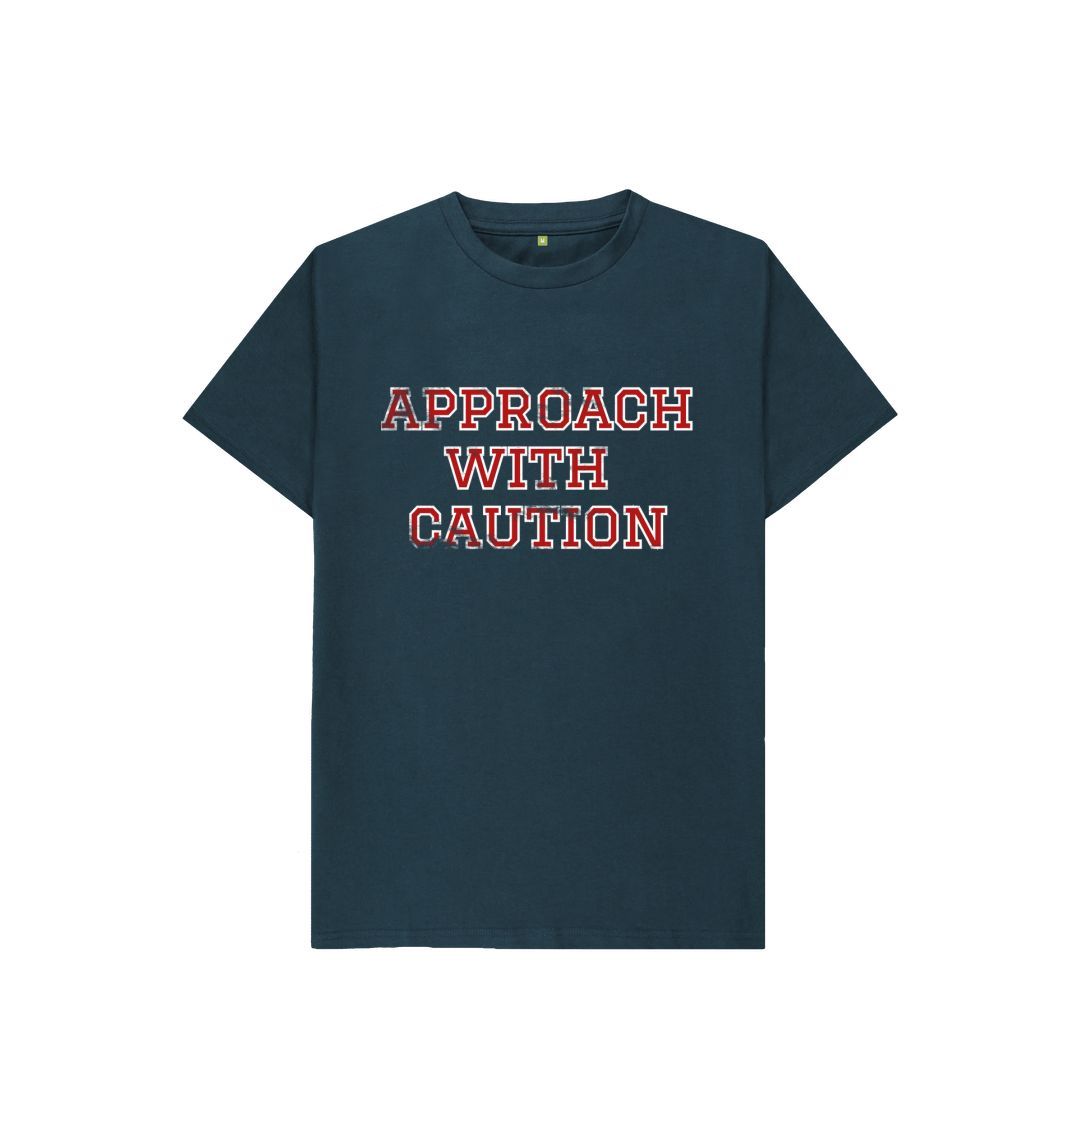 Denim Blue Approach With Caution Kids Tee